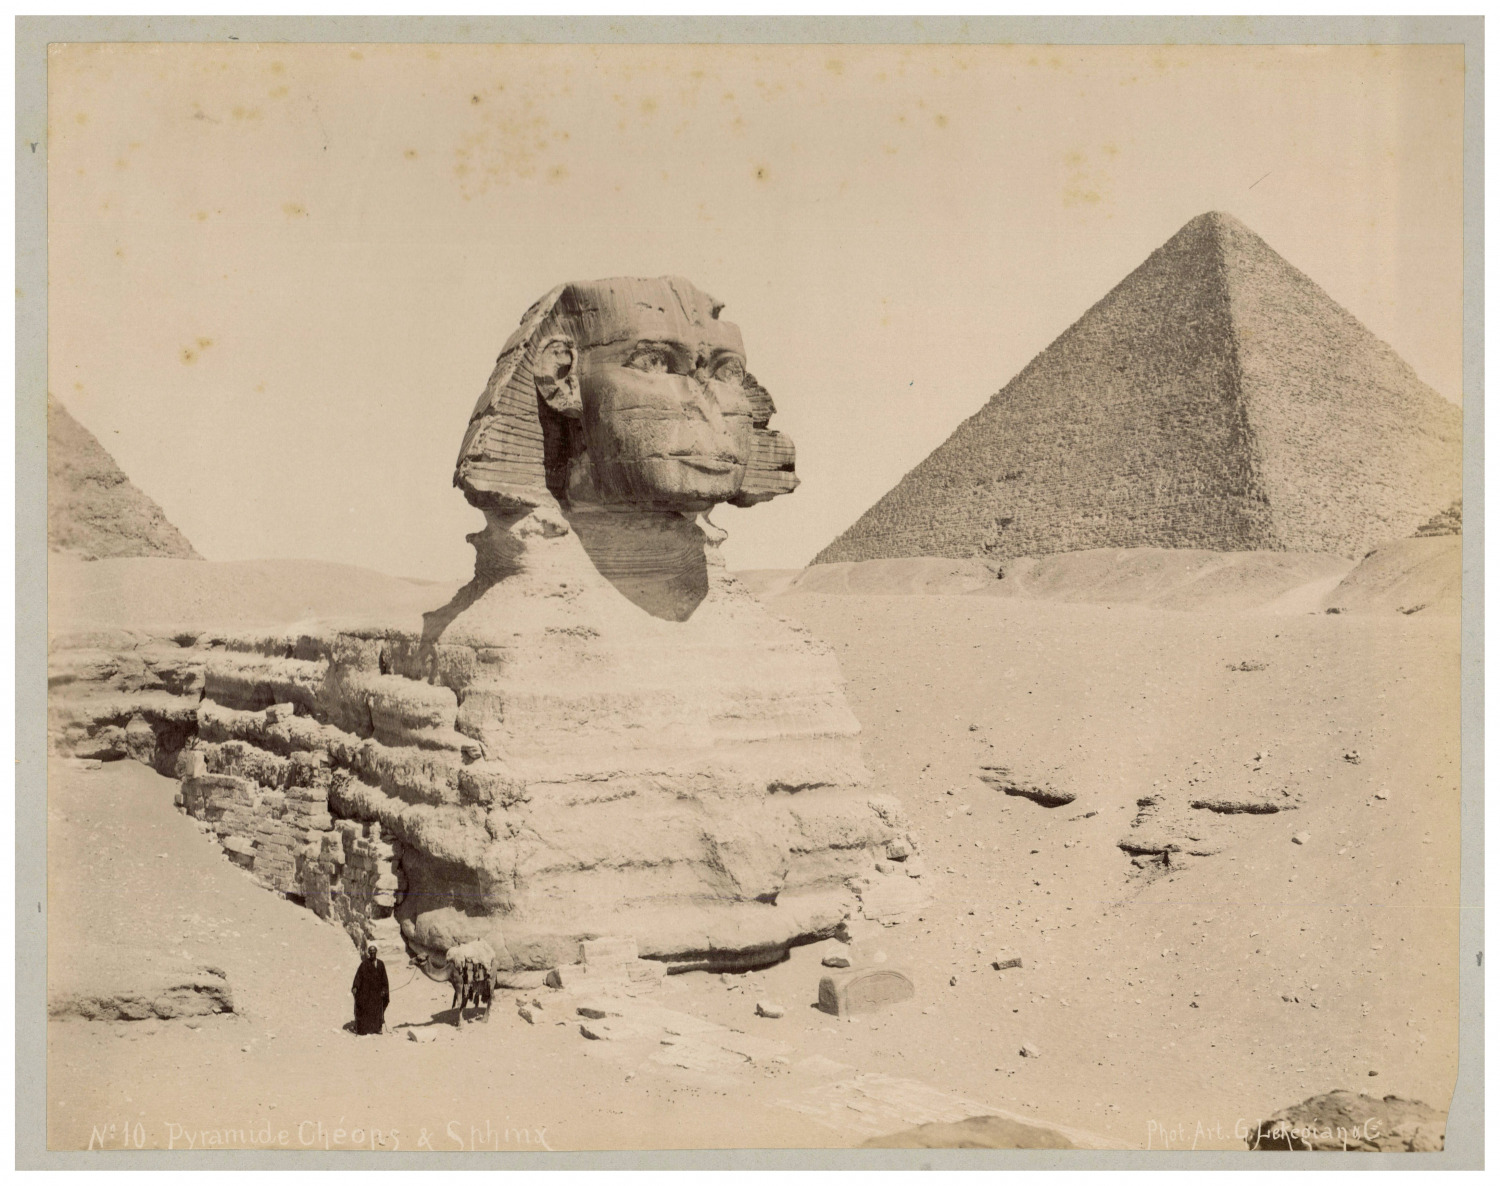 Egypt, Pyramid Cheops and the Sphinx, Photo. Art. Vintage Lékégian print, T